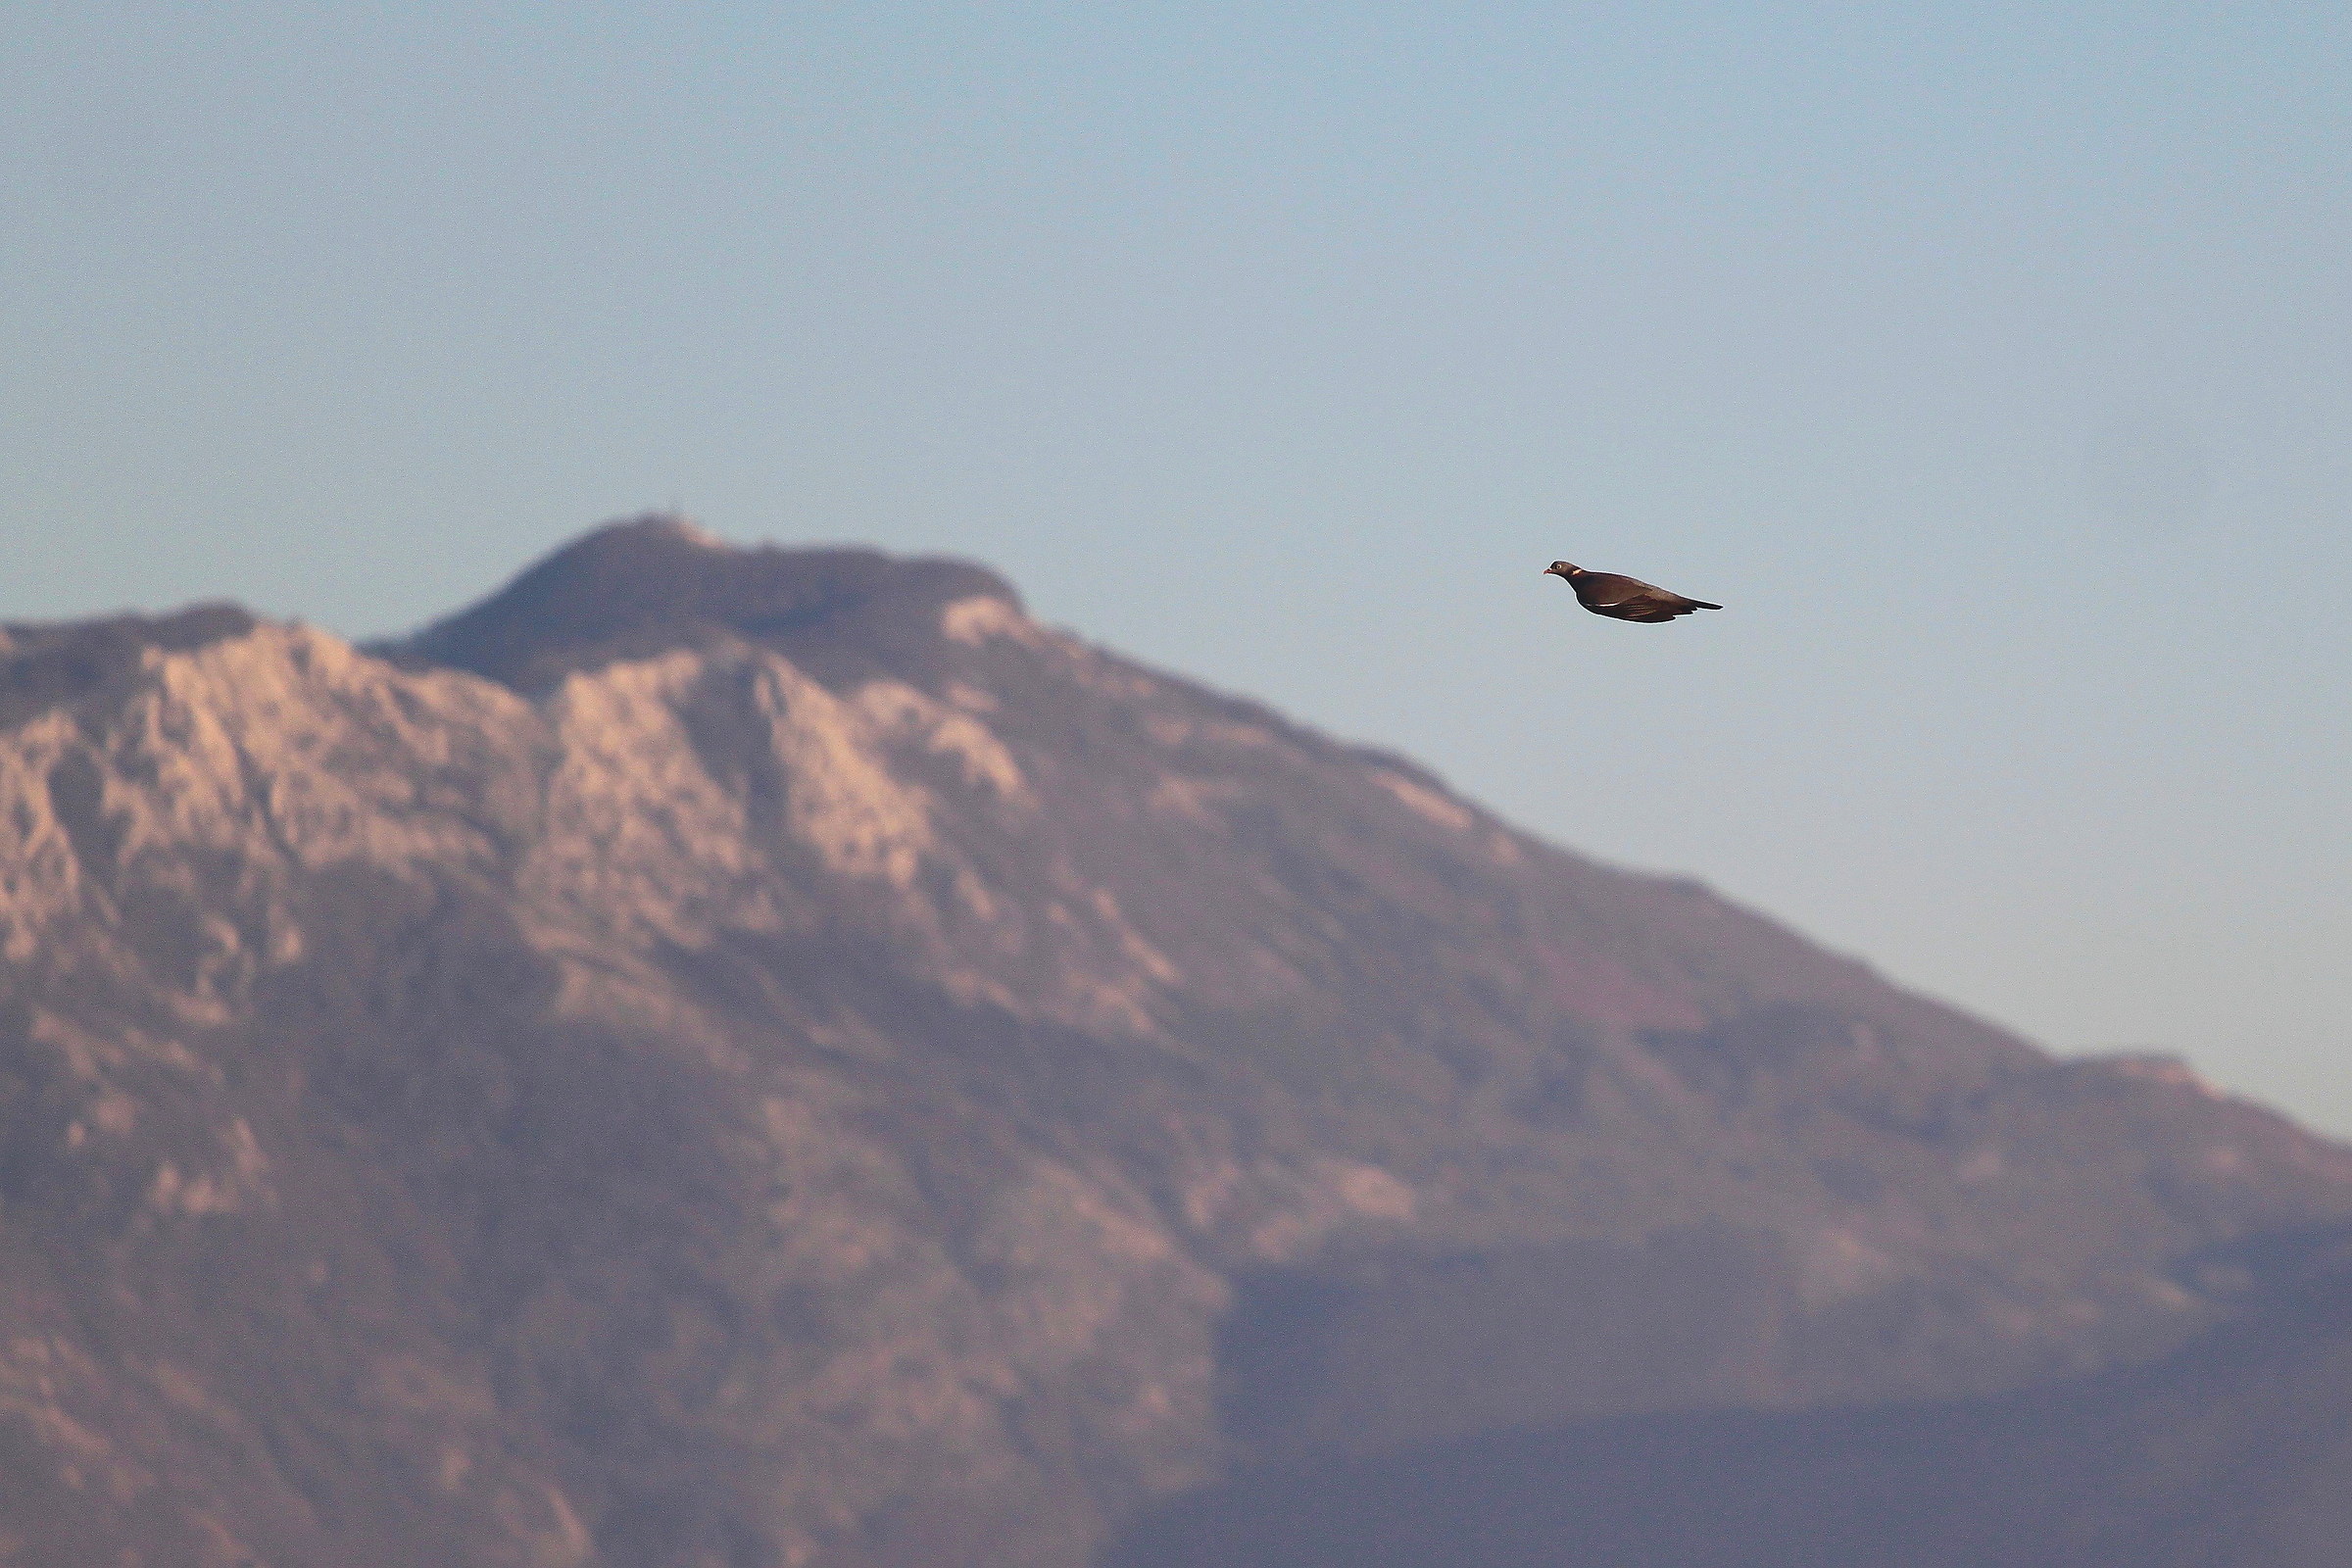 The pigeon and the mountain...